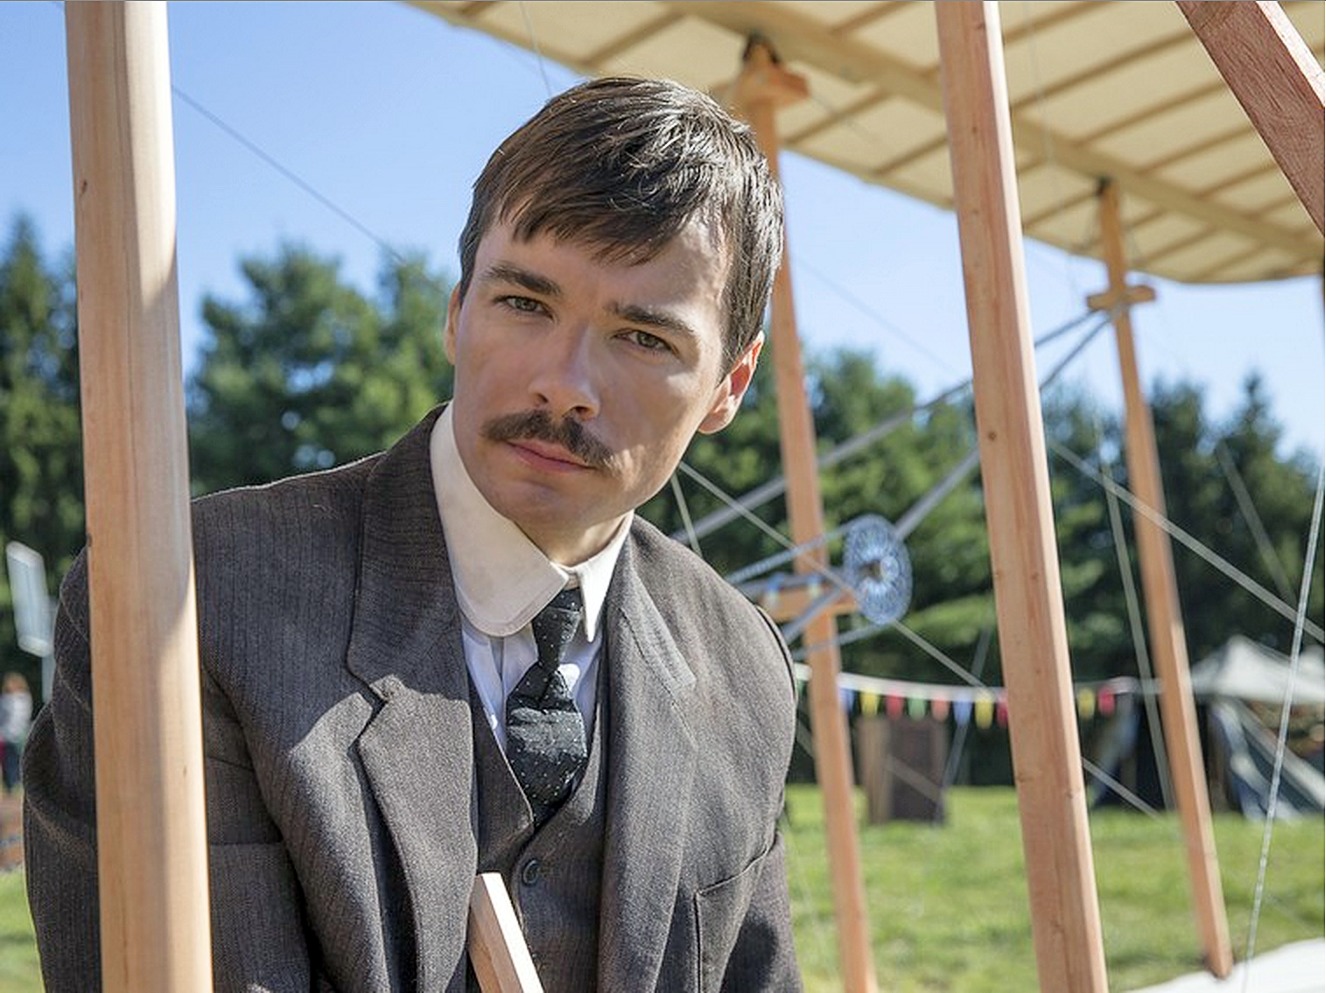 As Orville Wright from American Genius